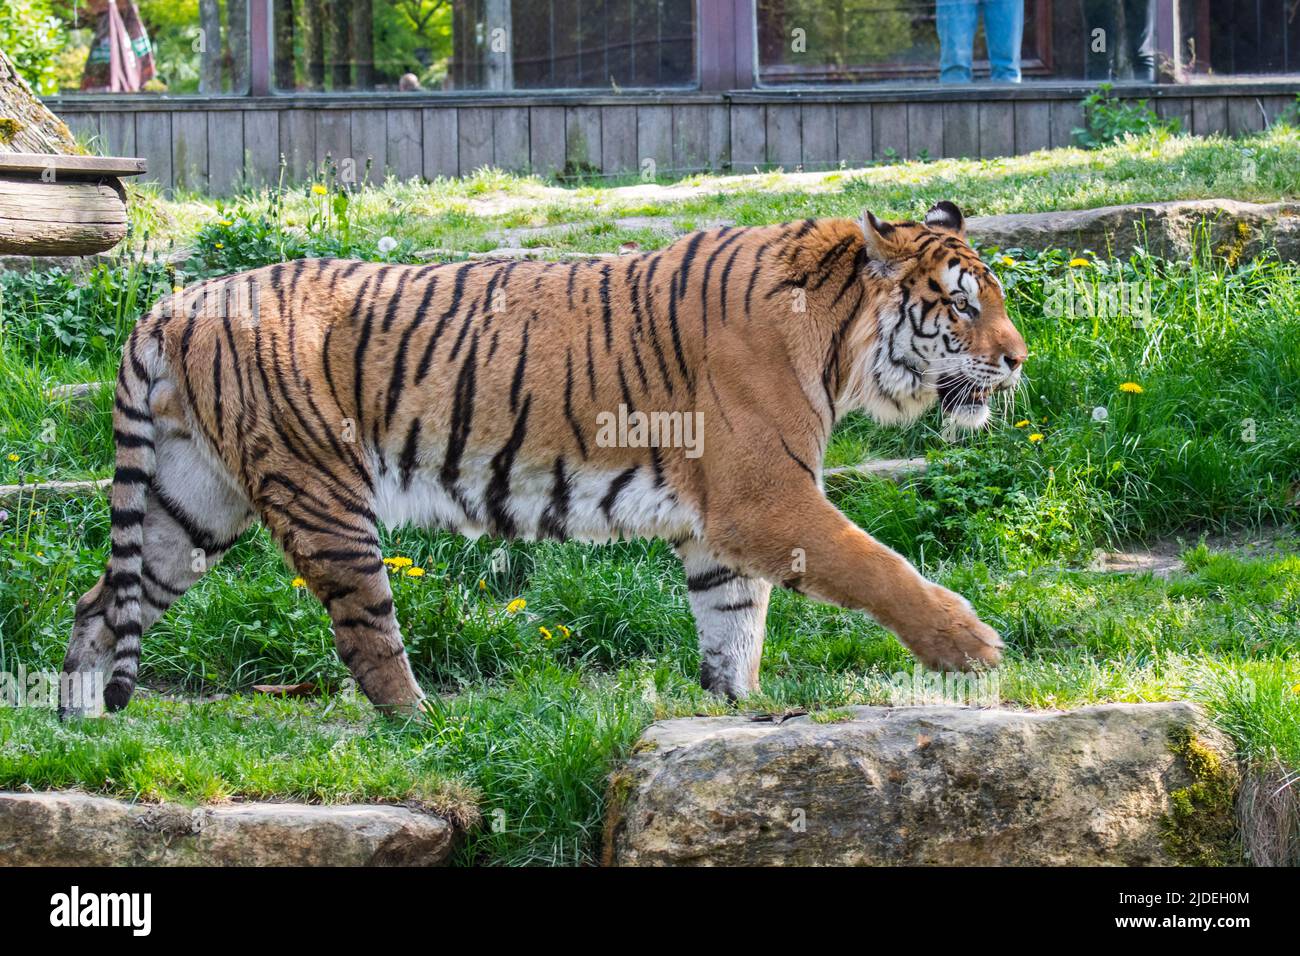 Siberian tiger (Panthera tigris altaica) walking in enclosure of zoo / zoological park Stock Photo